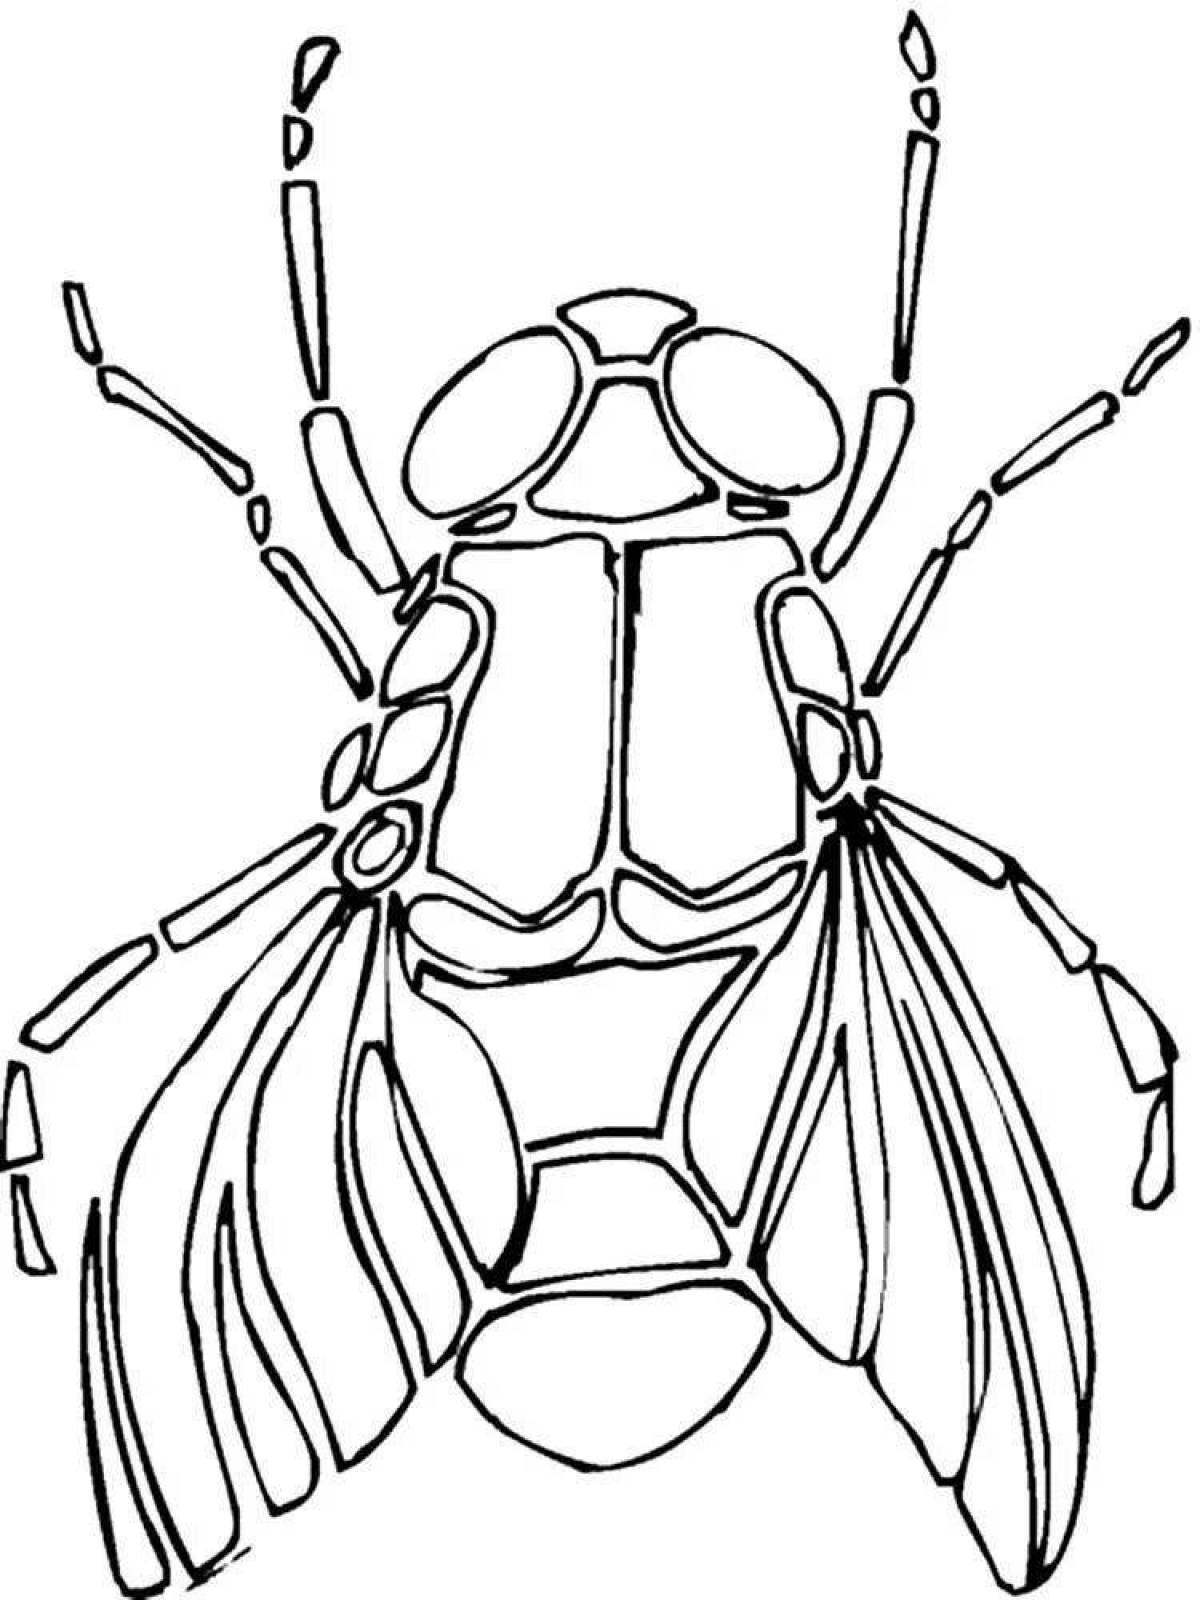 Cute fly coloring page for kids